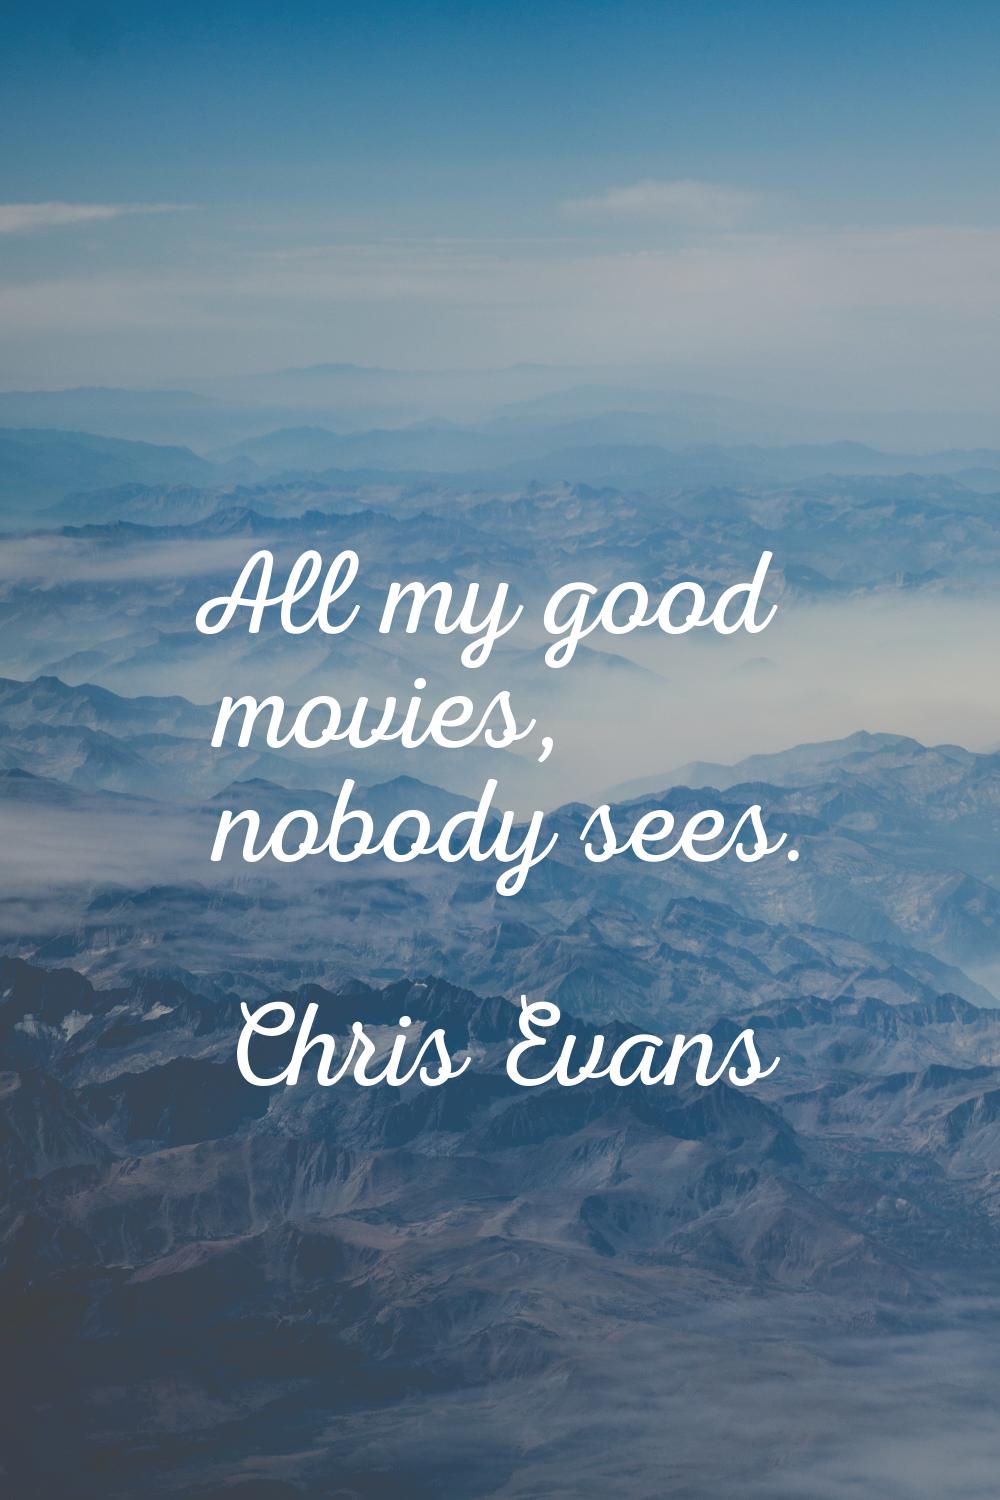 All my good movies, nobody sees.